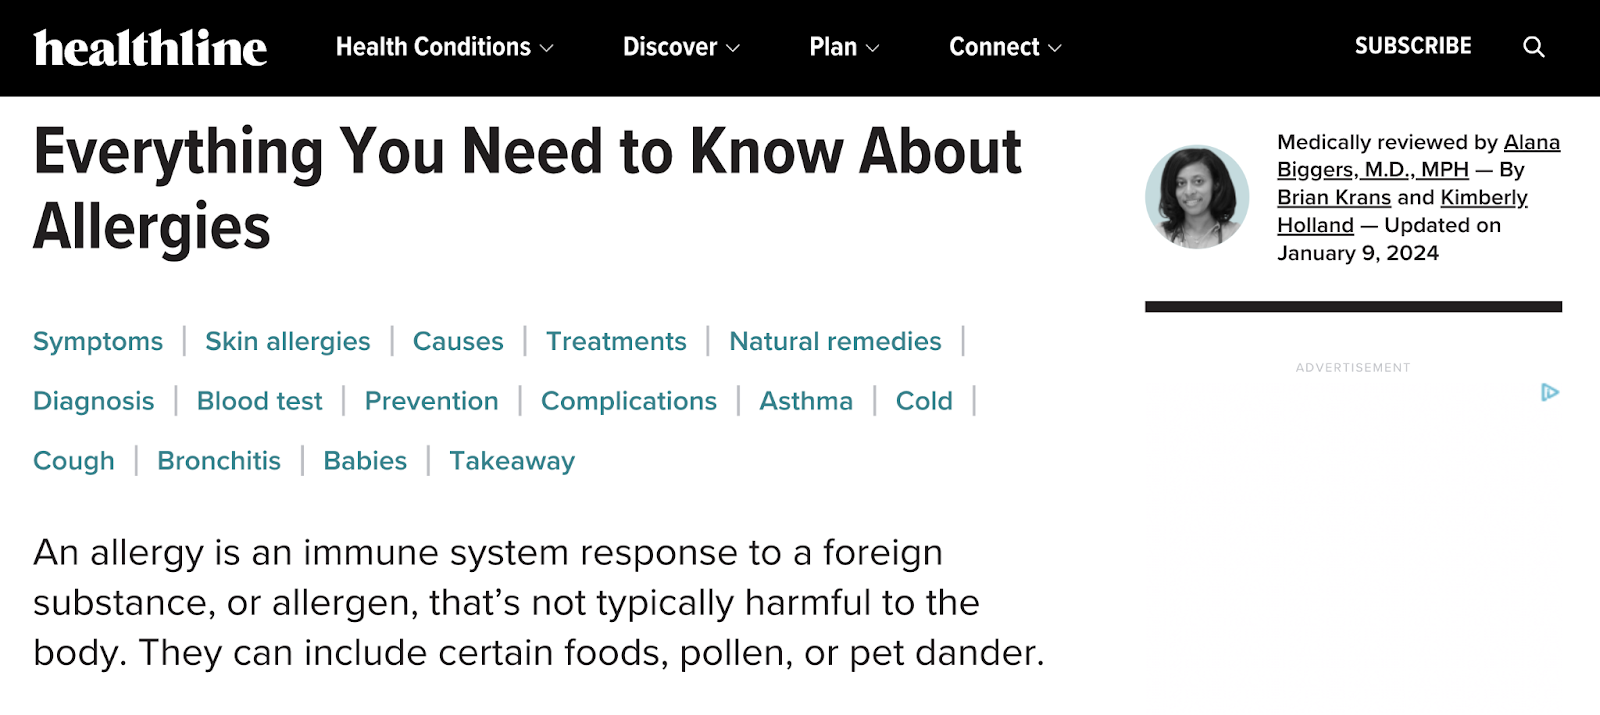 Healthline's article called “Everything You Need to Know About Allergies”